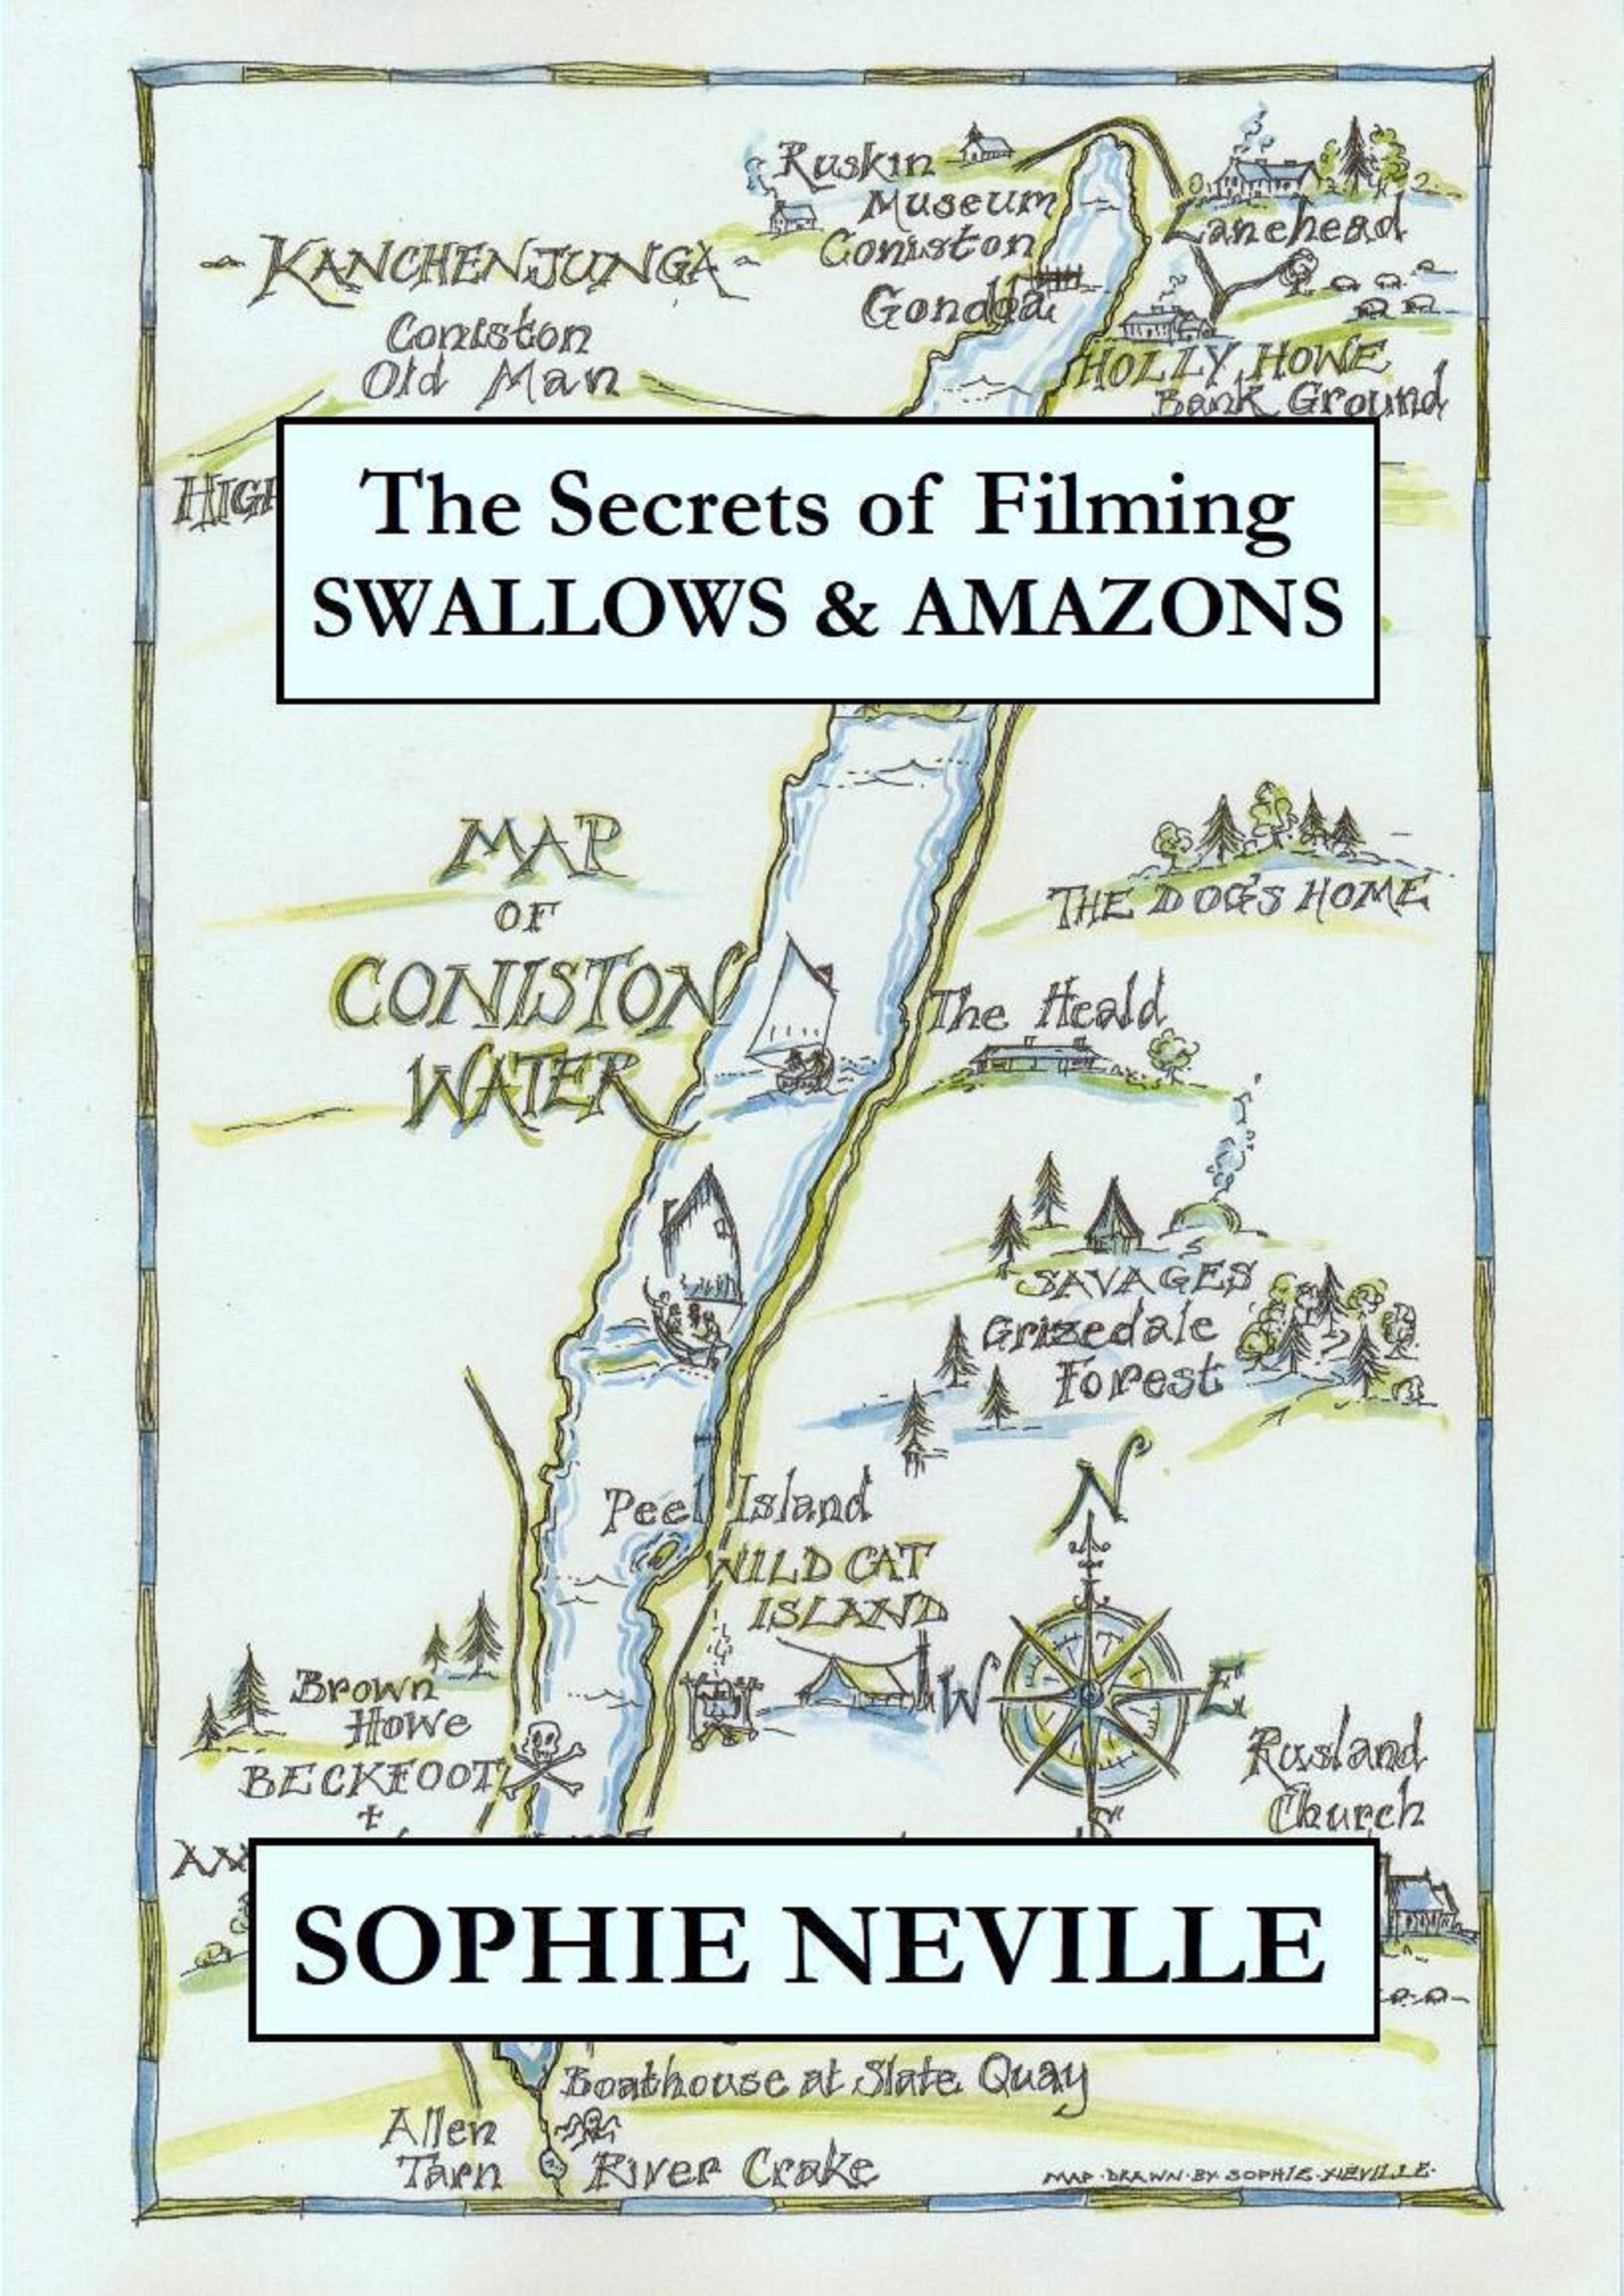 'The Secrets of Filming SWALLOWS 7 AMAZONS' by Sophie Neville